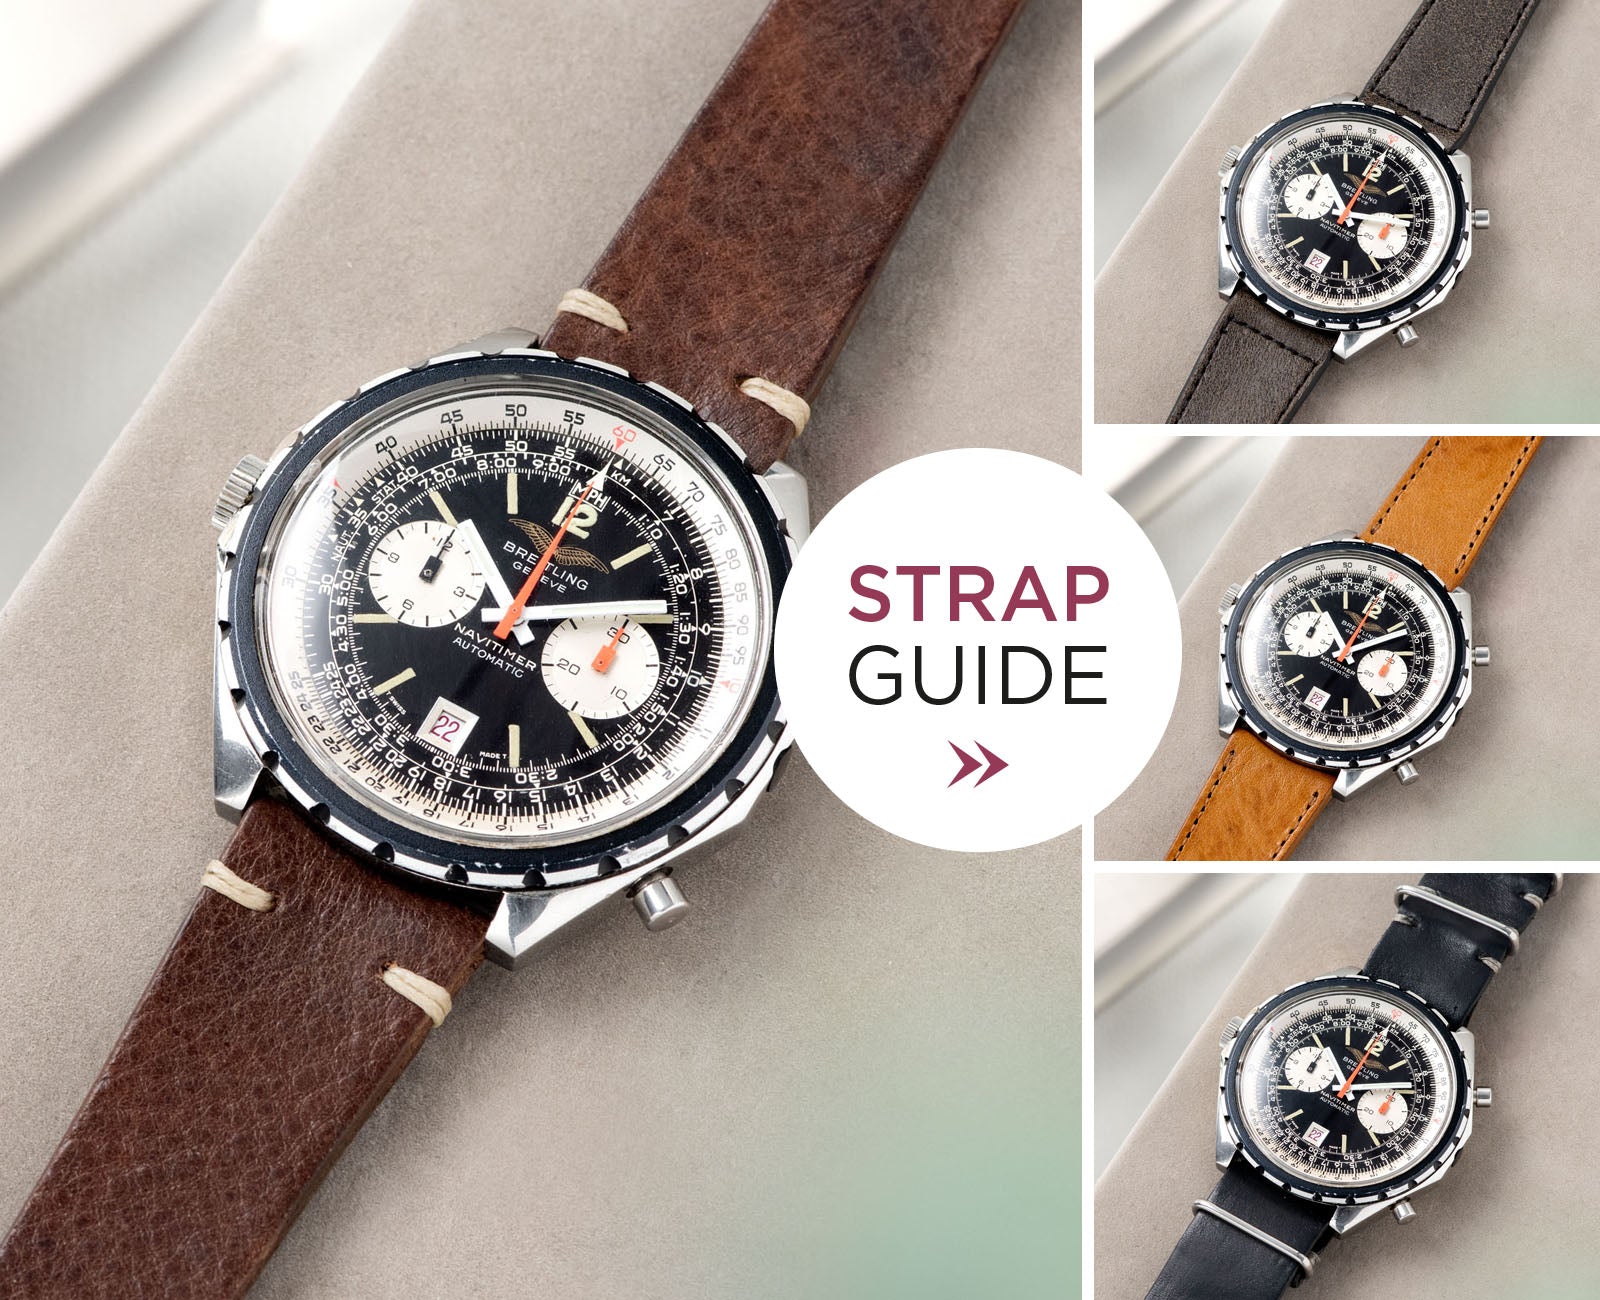 FEATURED IMAGE Breitling Navitimer